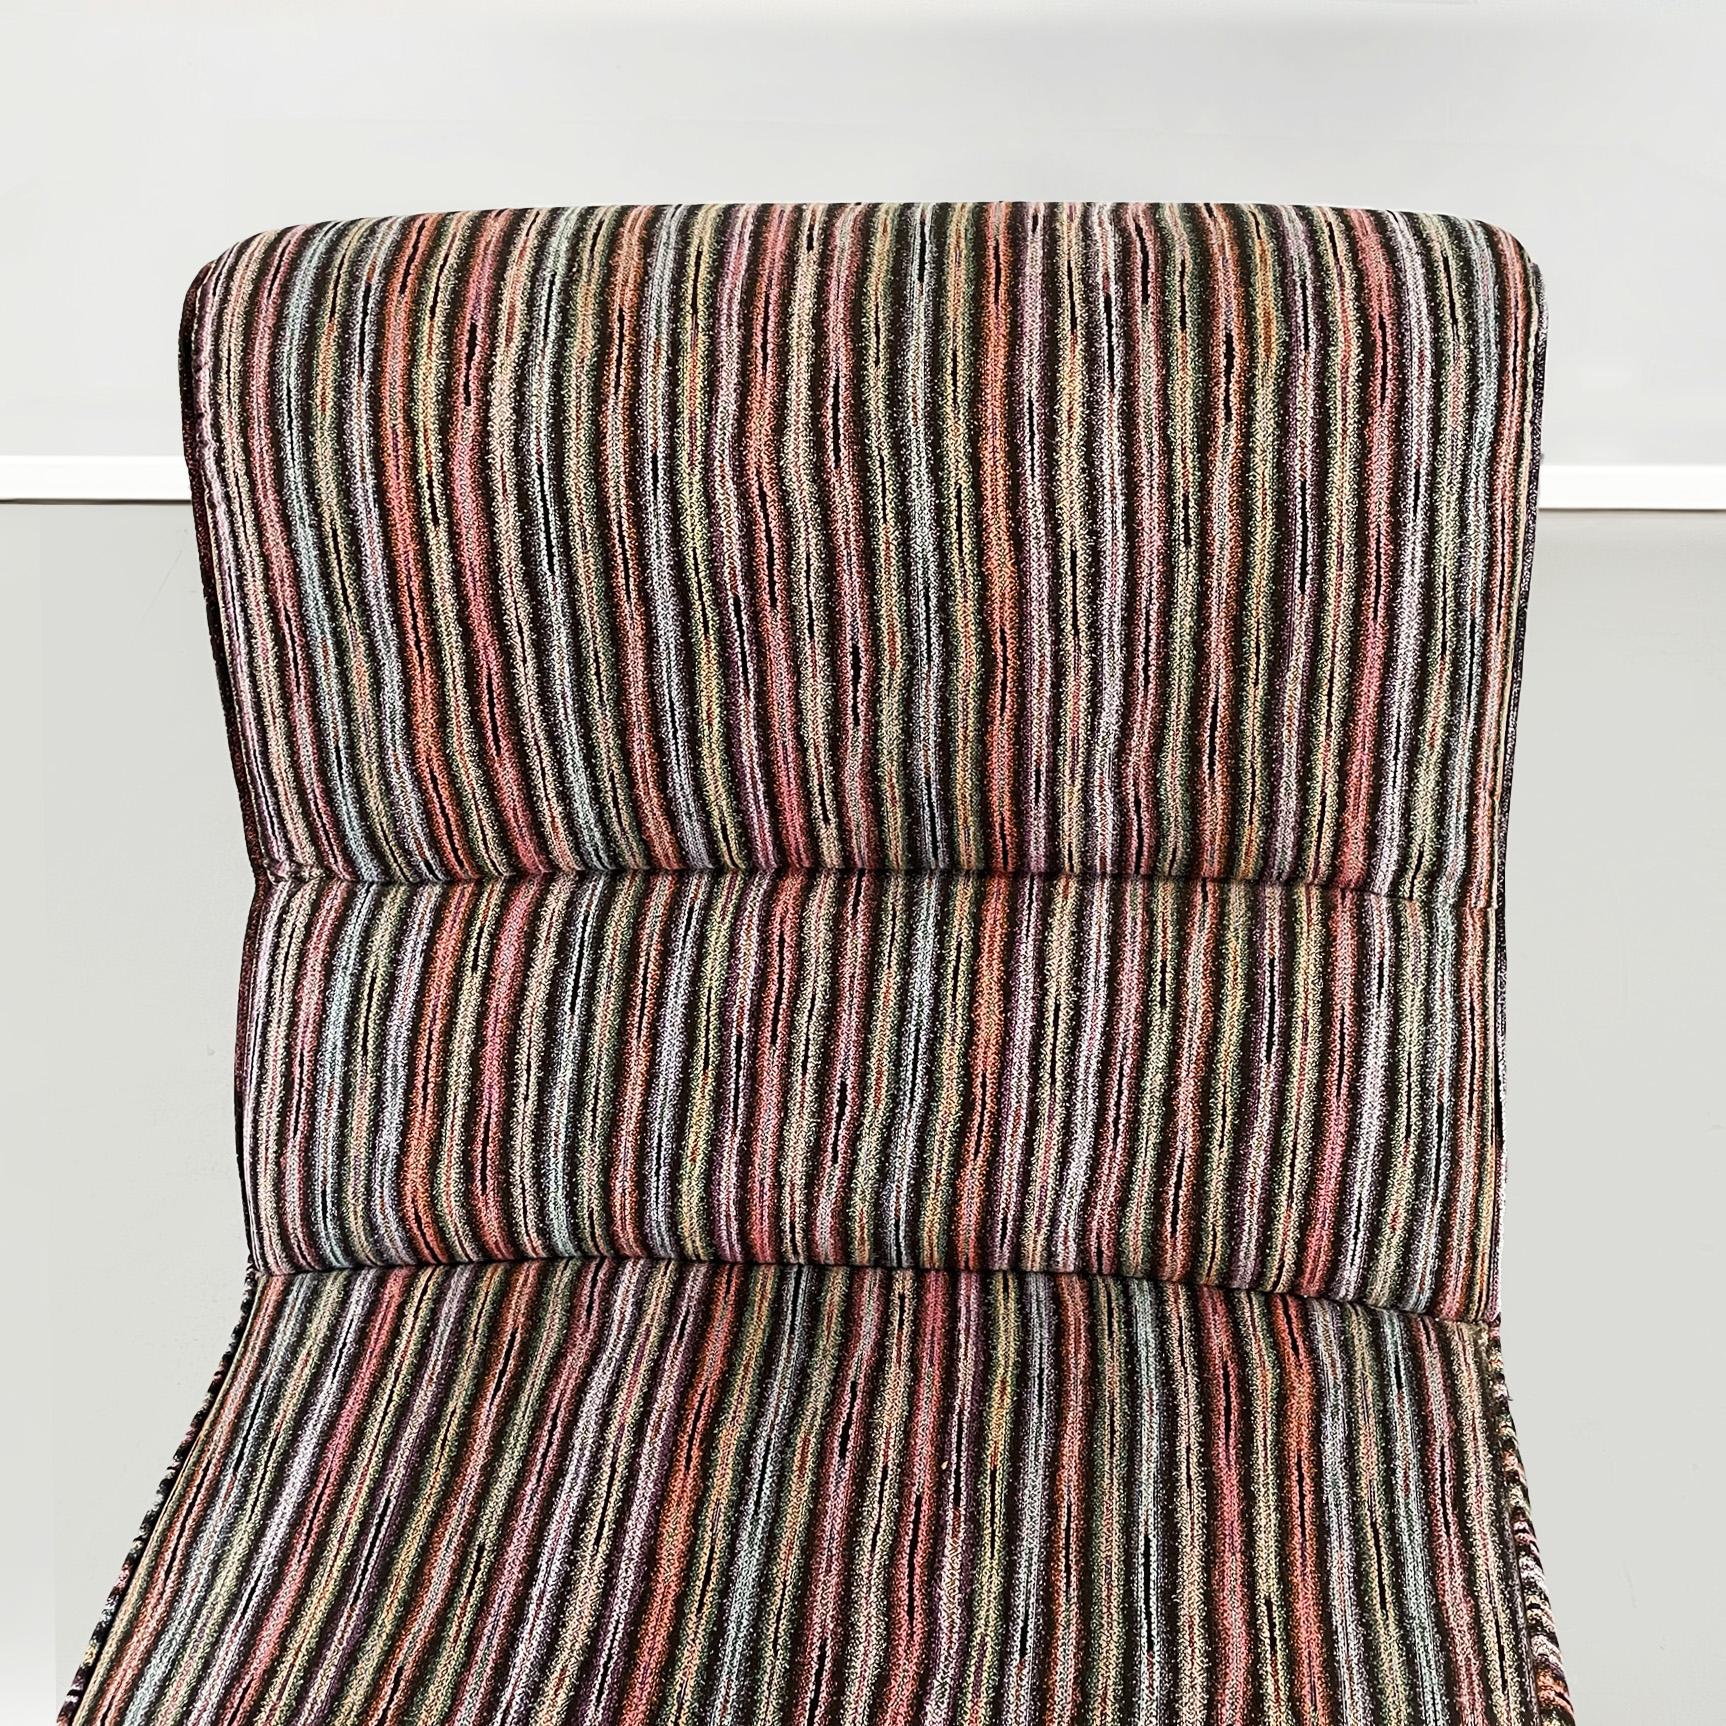 Italian Midcentury Venetian Style Chaise Longue with Missoni Striped Fabric, 1950 For Sale 1